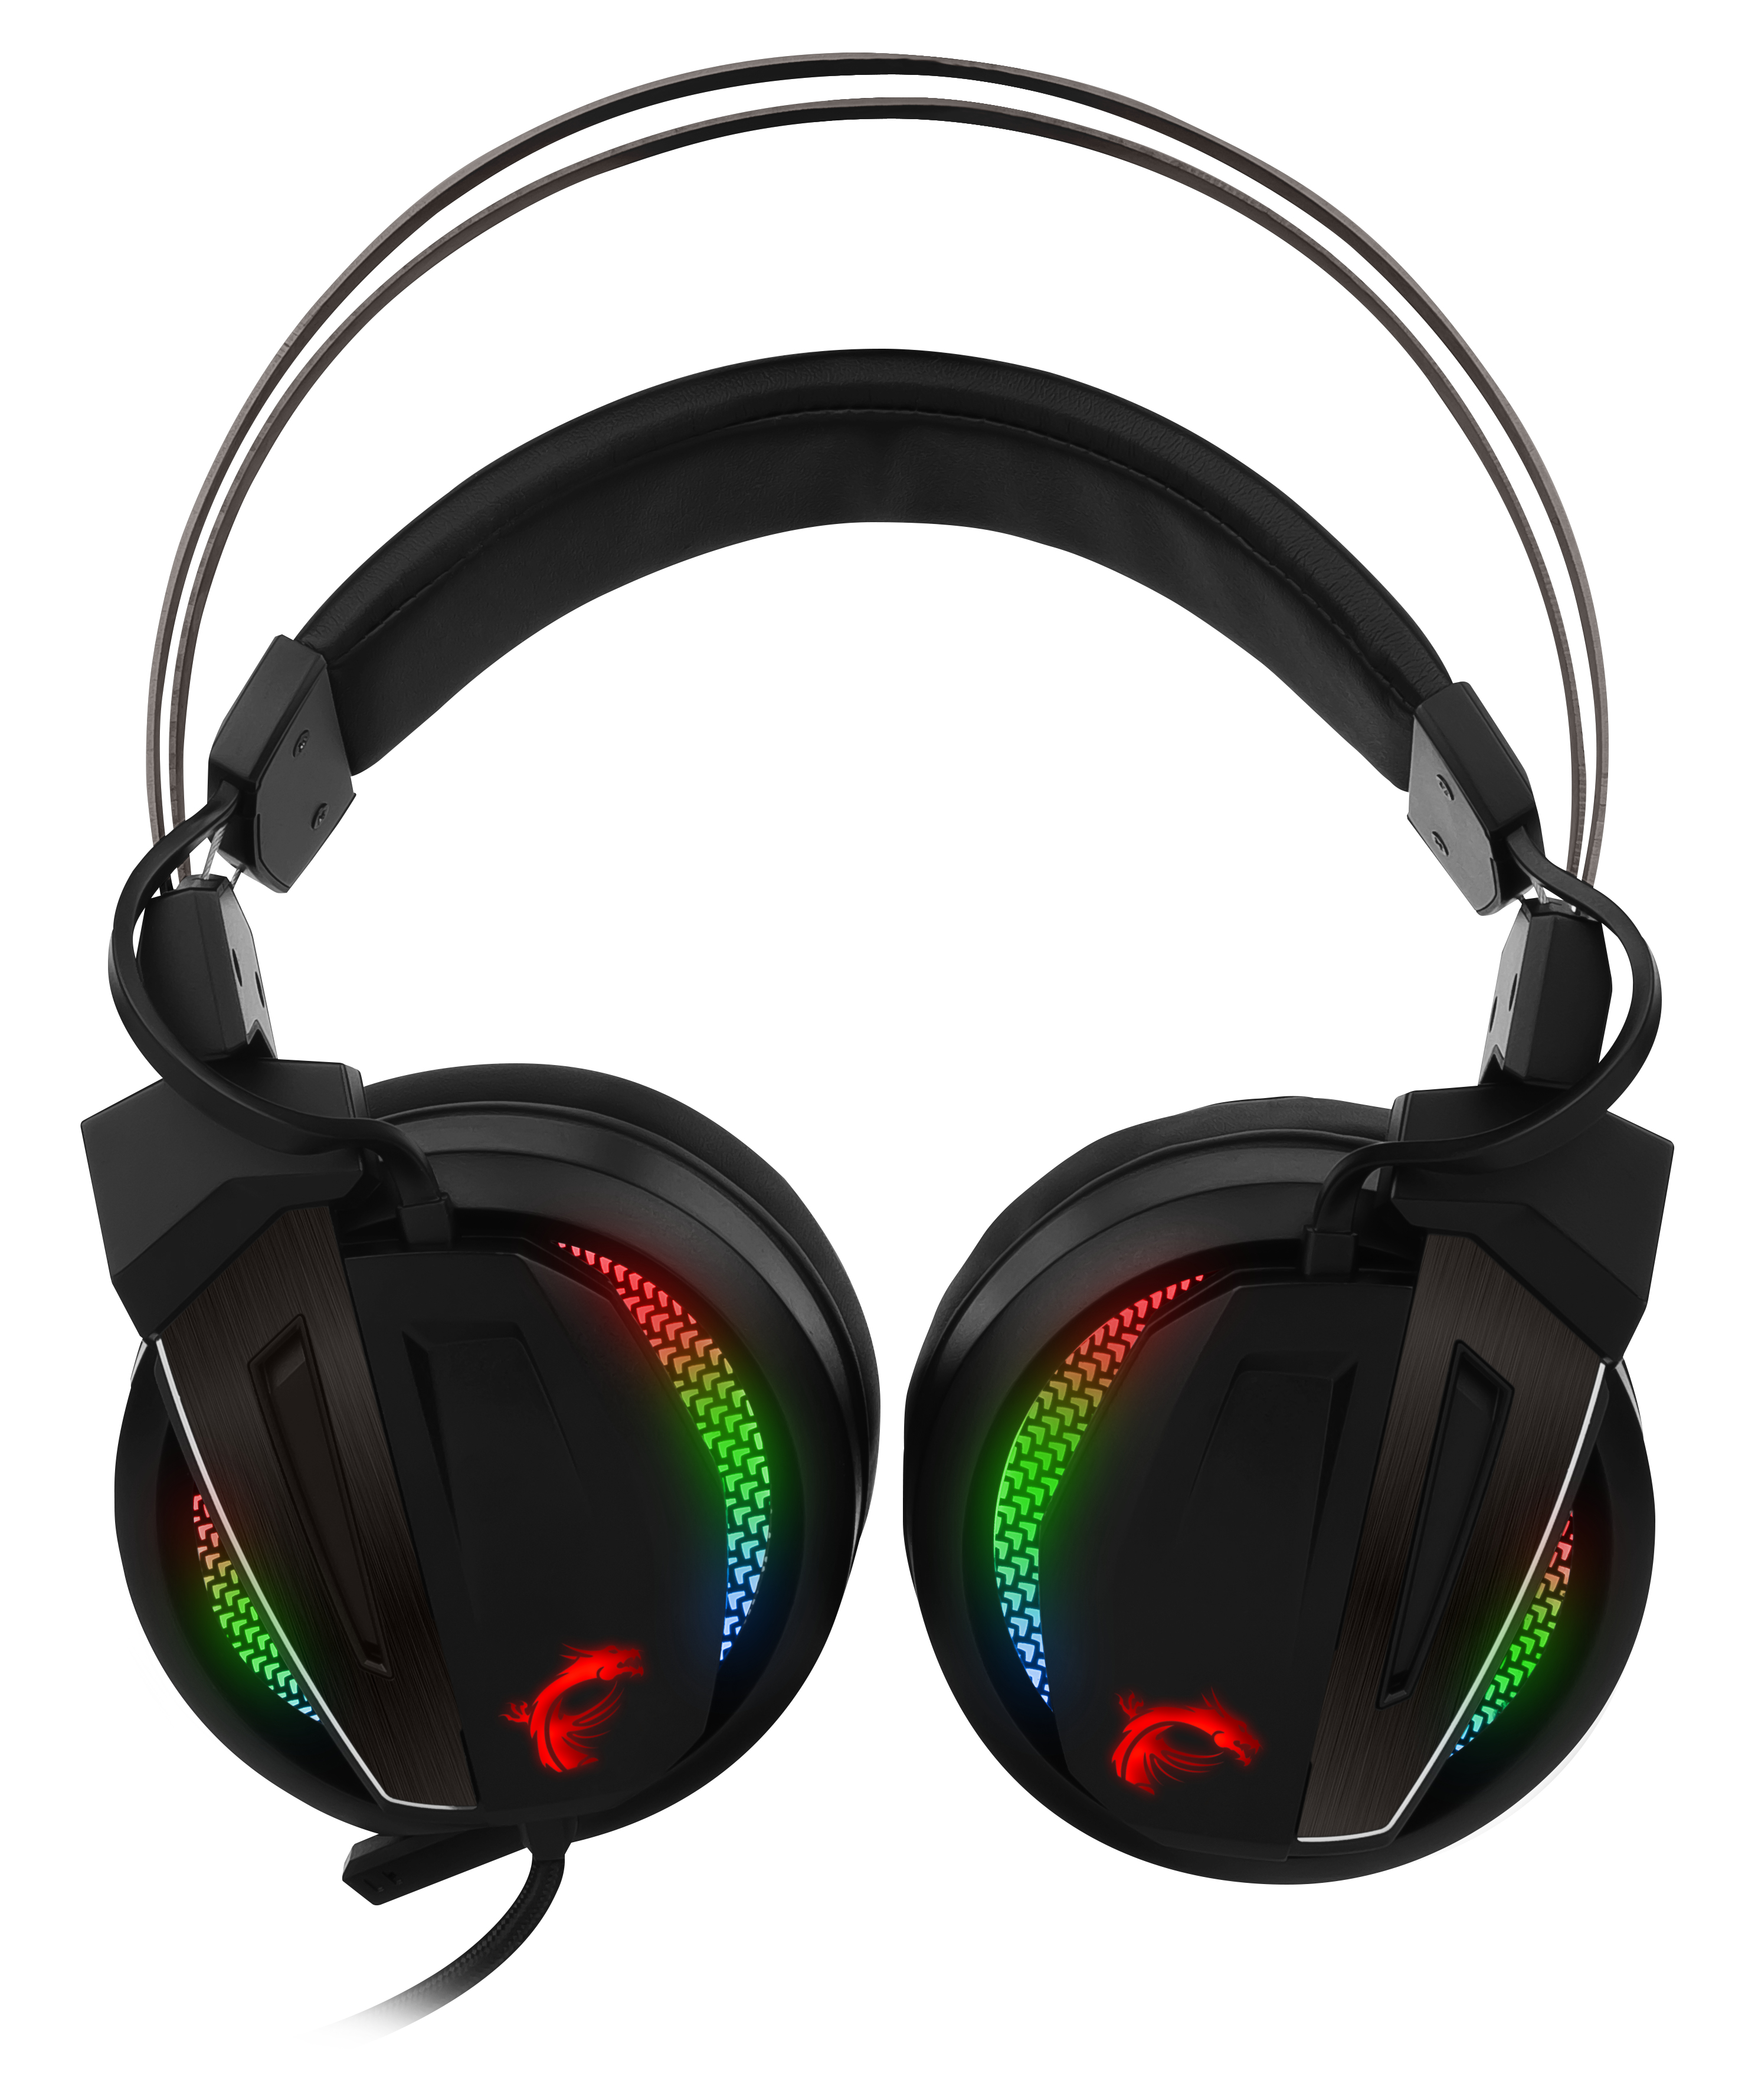 MSI Immerse Gh70 Black Gaming Headset